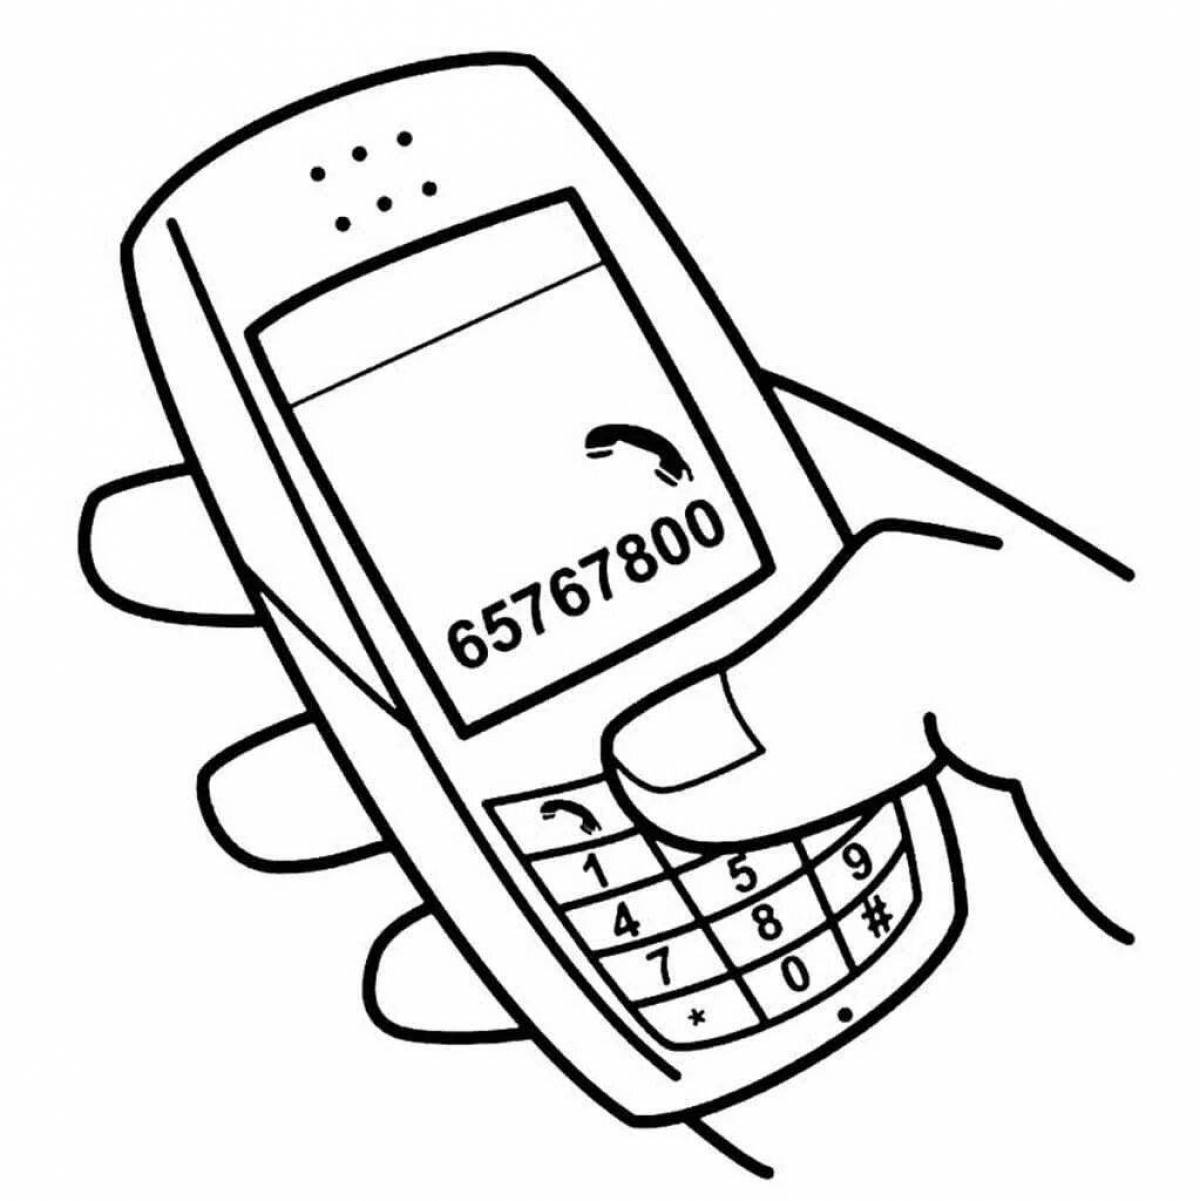 Phone color-blast coloring page